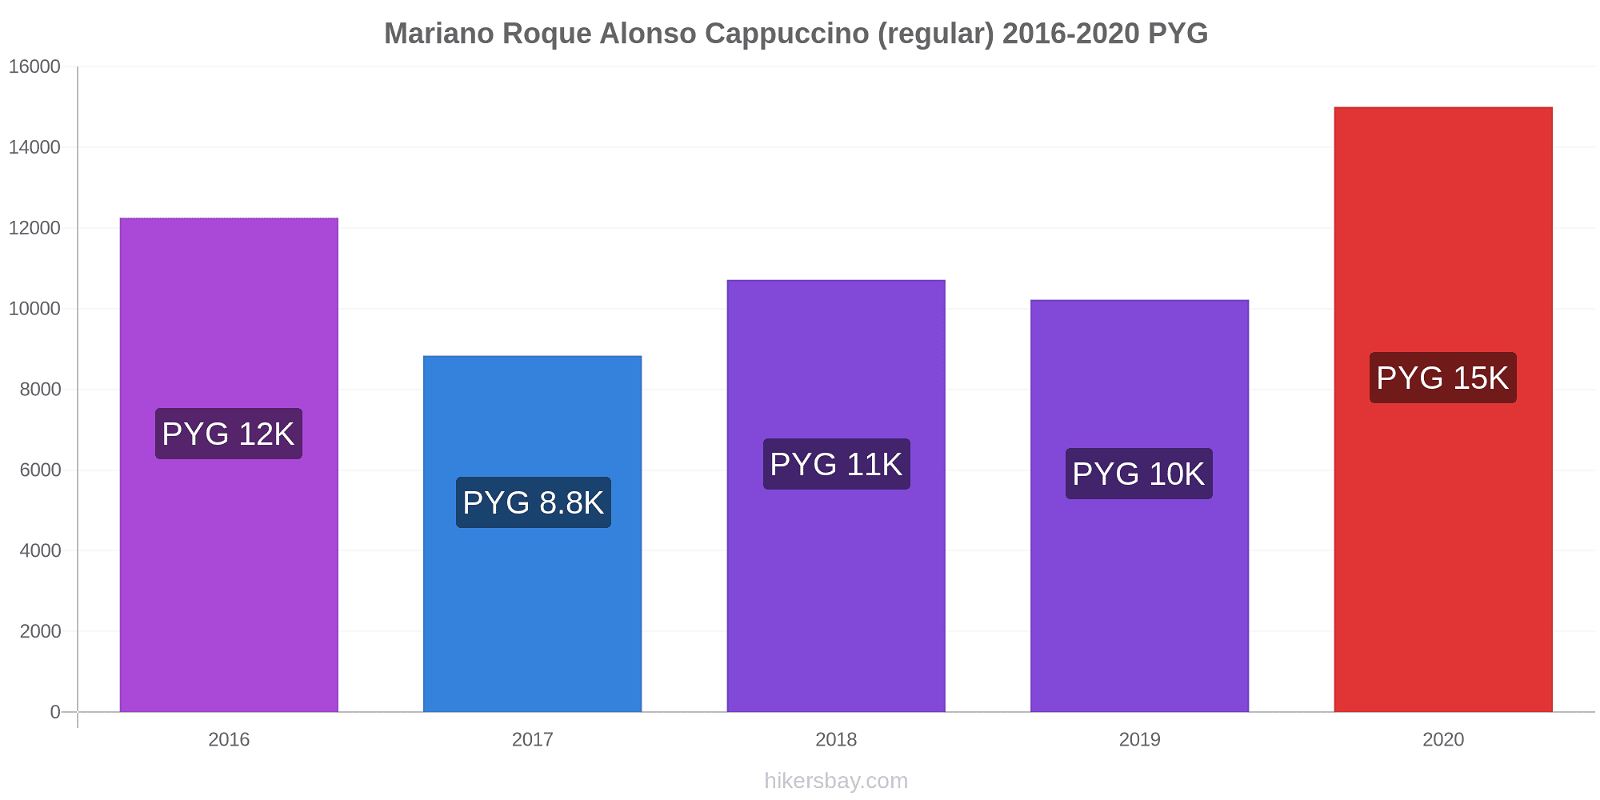 Mariano Roque Alonso price changes Cappuccino (regular) hikersbay.com